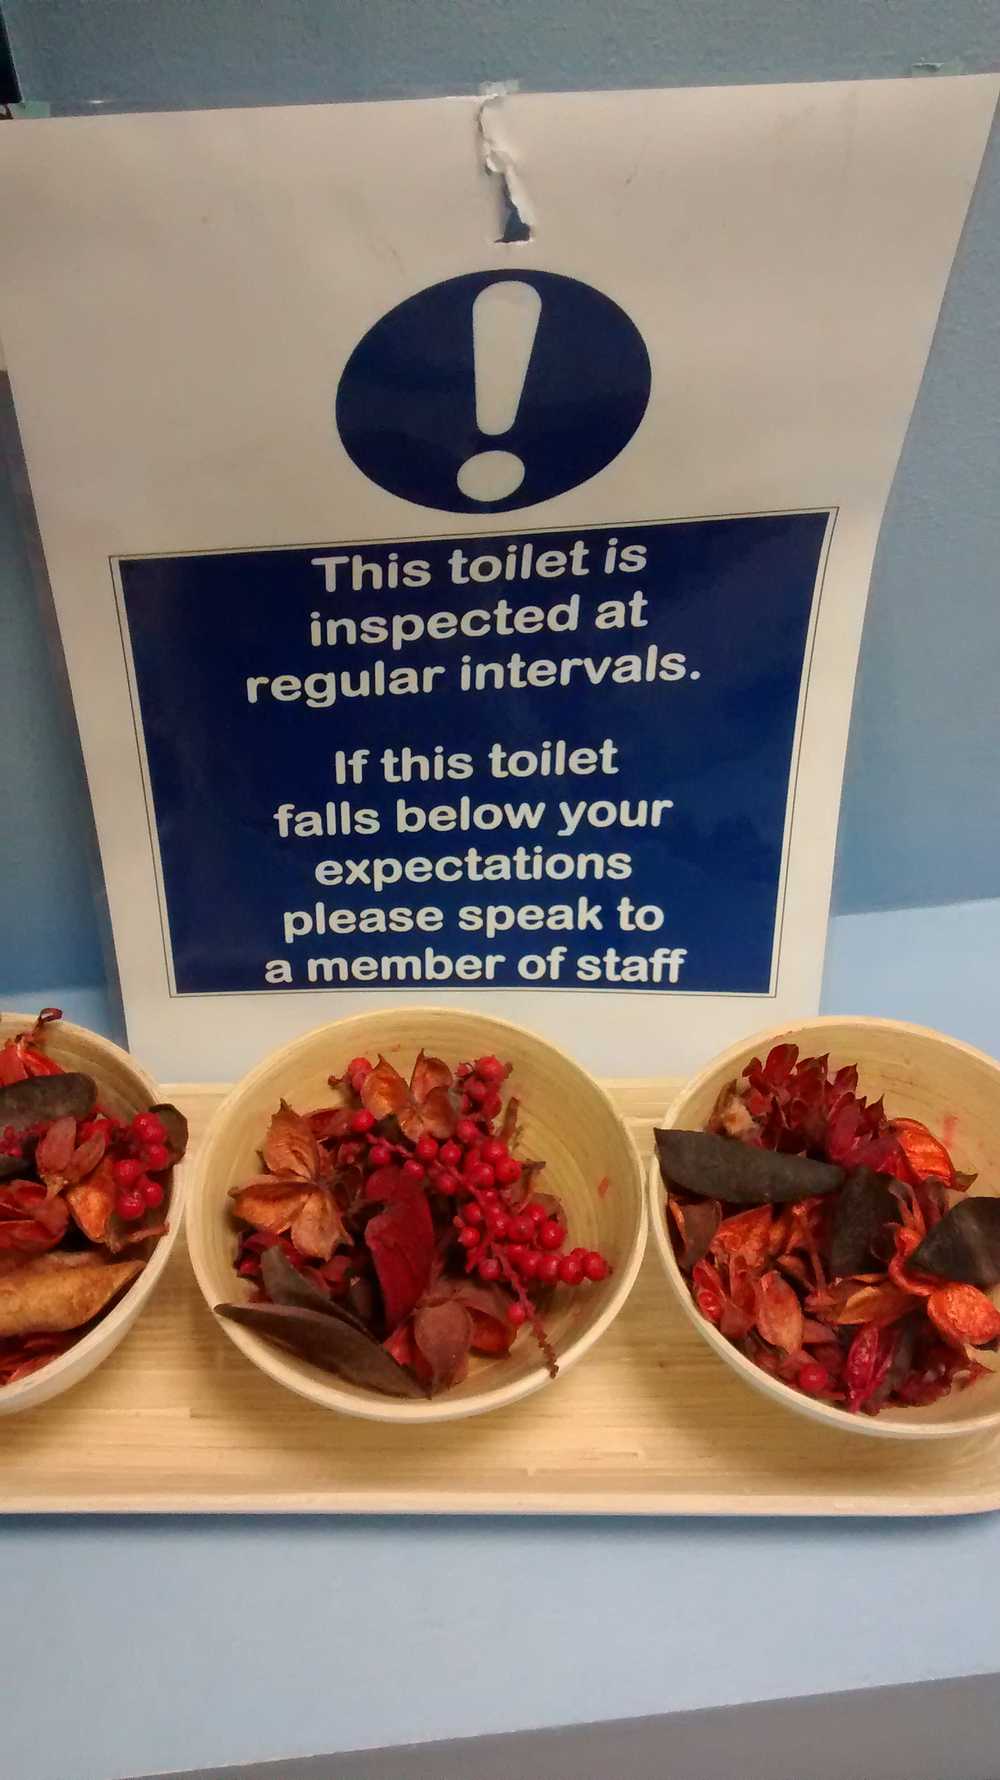 If this toilet falls below your expectations